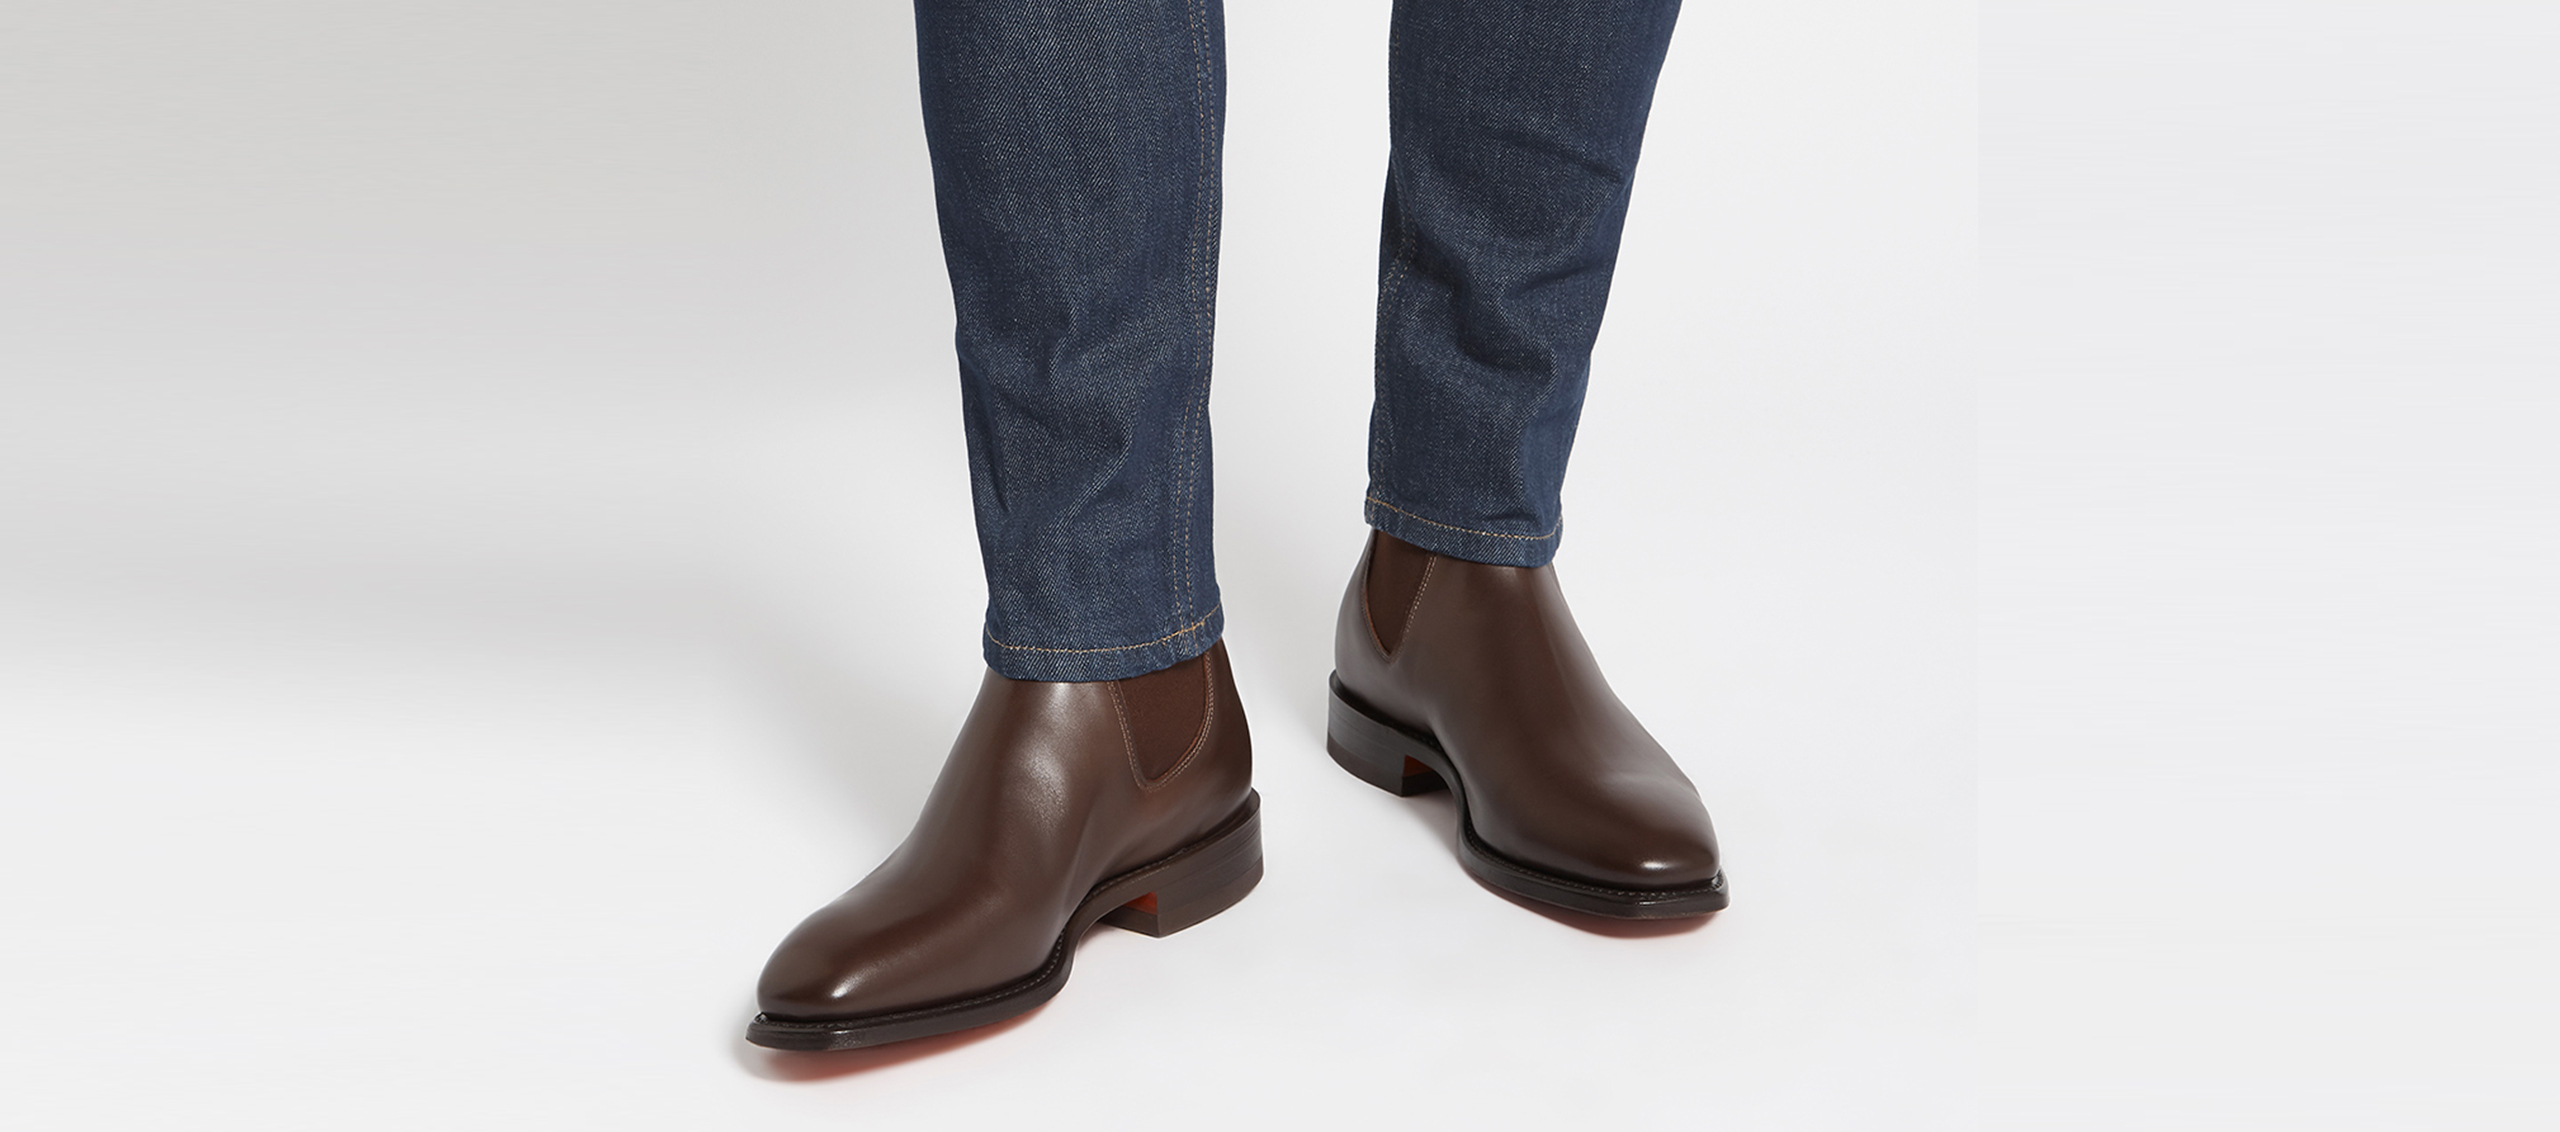 rm williams boots suit